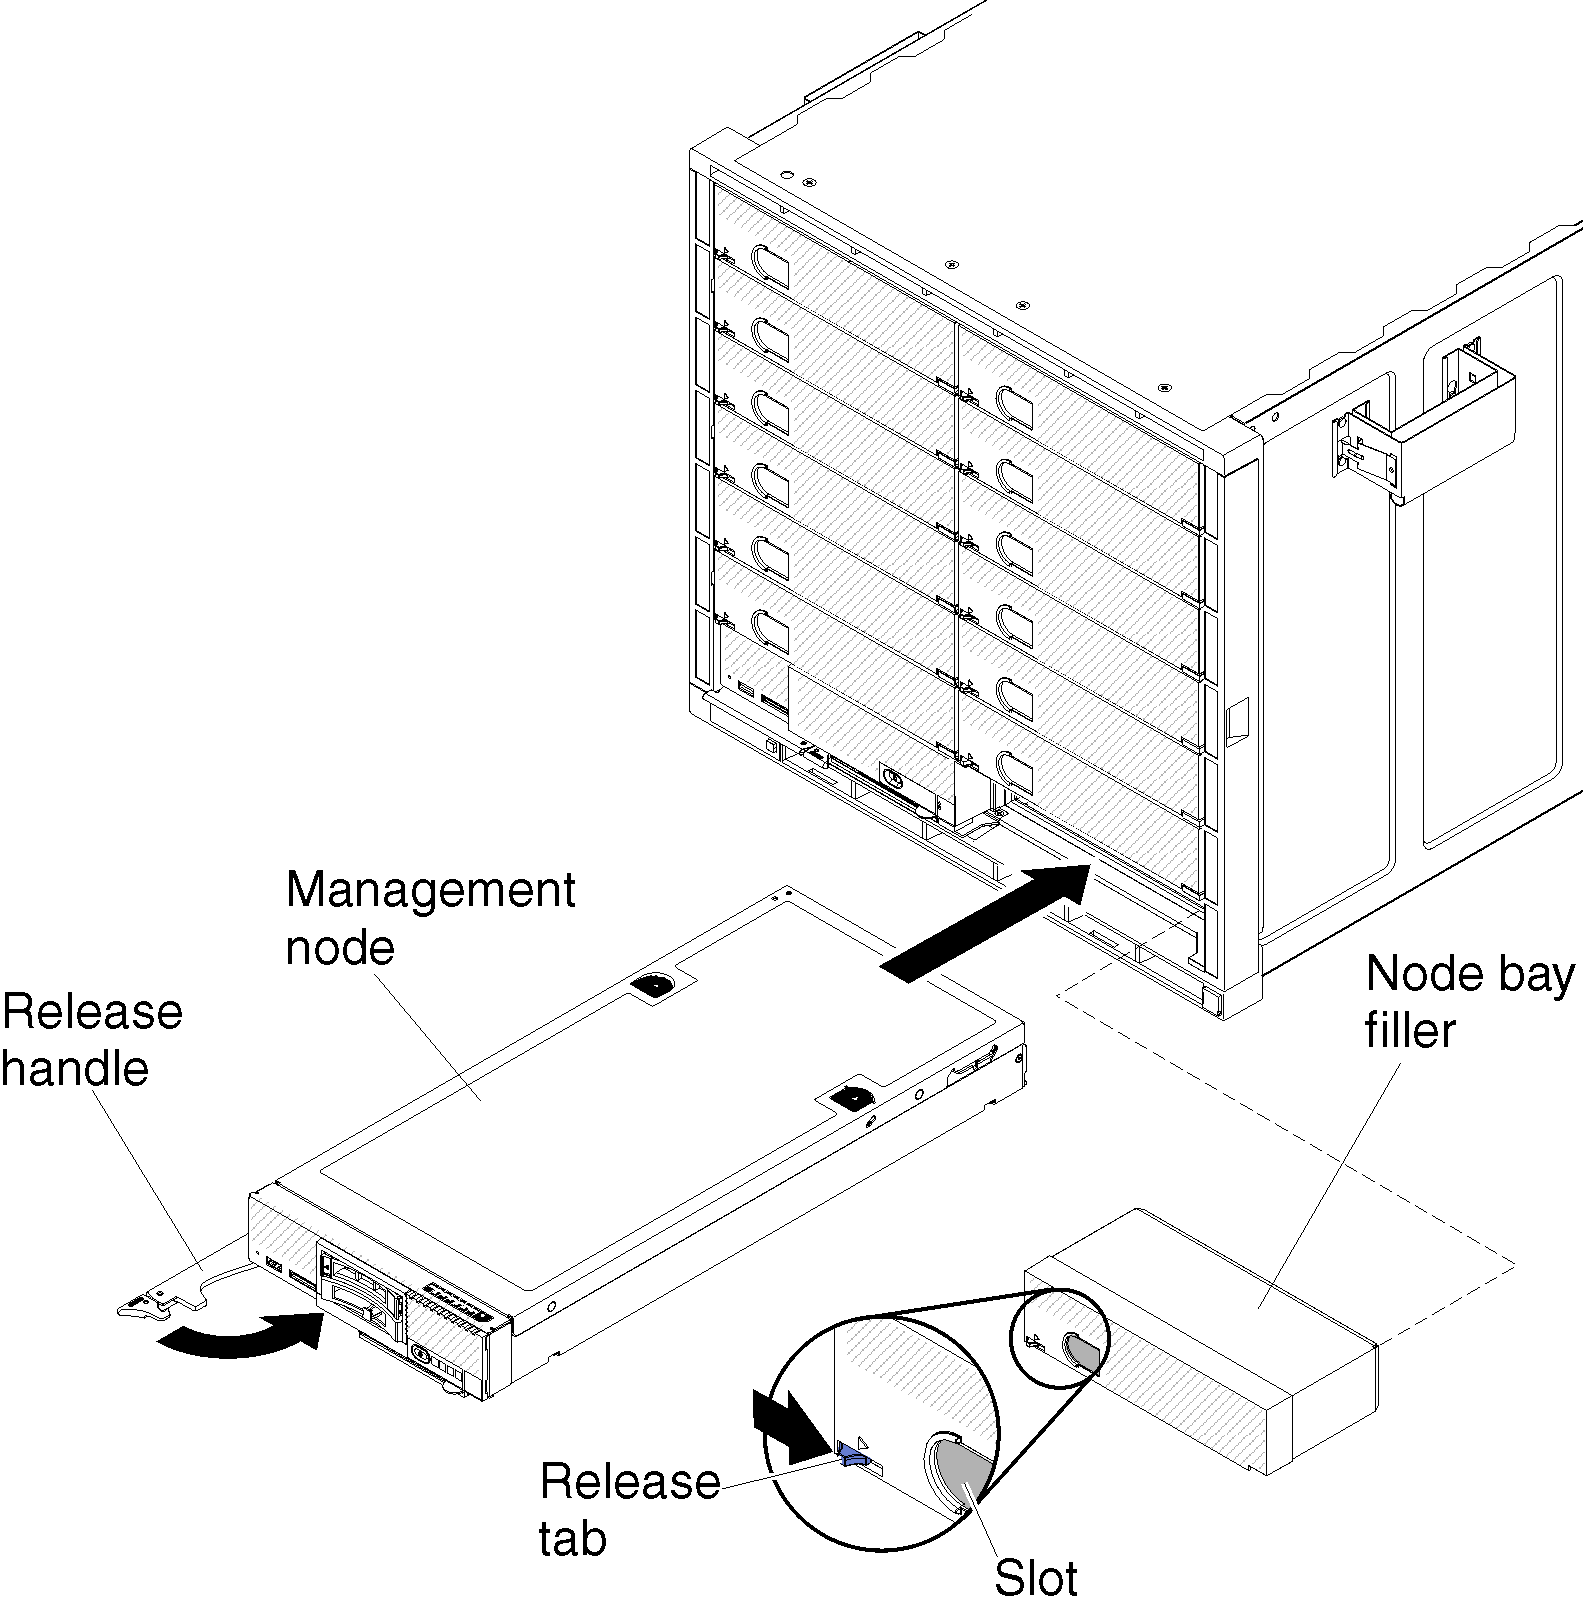 Graphic showing the installation of the Flex System Manager management node in the chassis